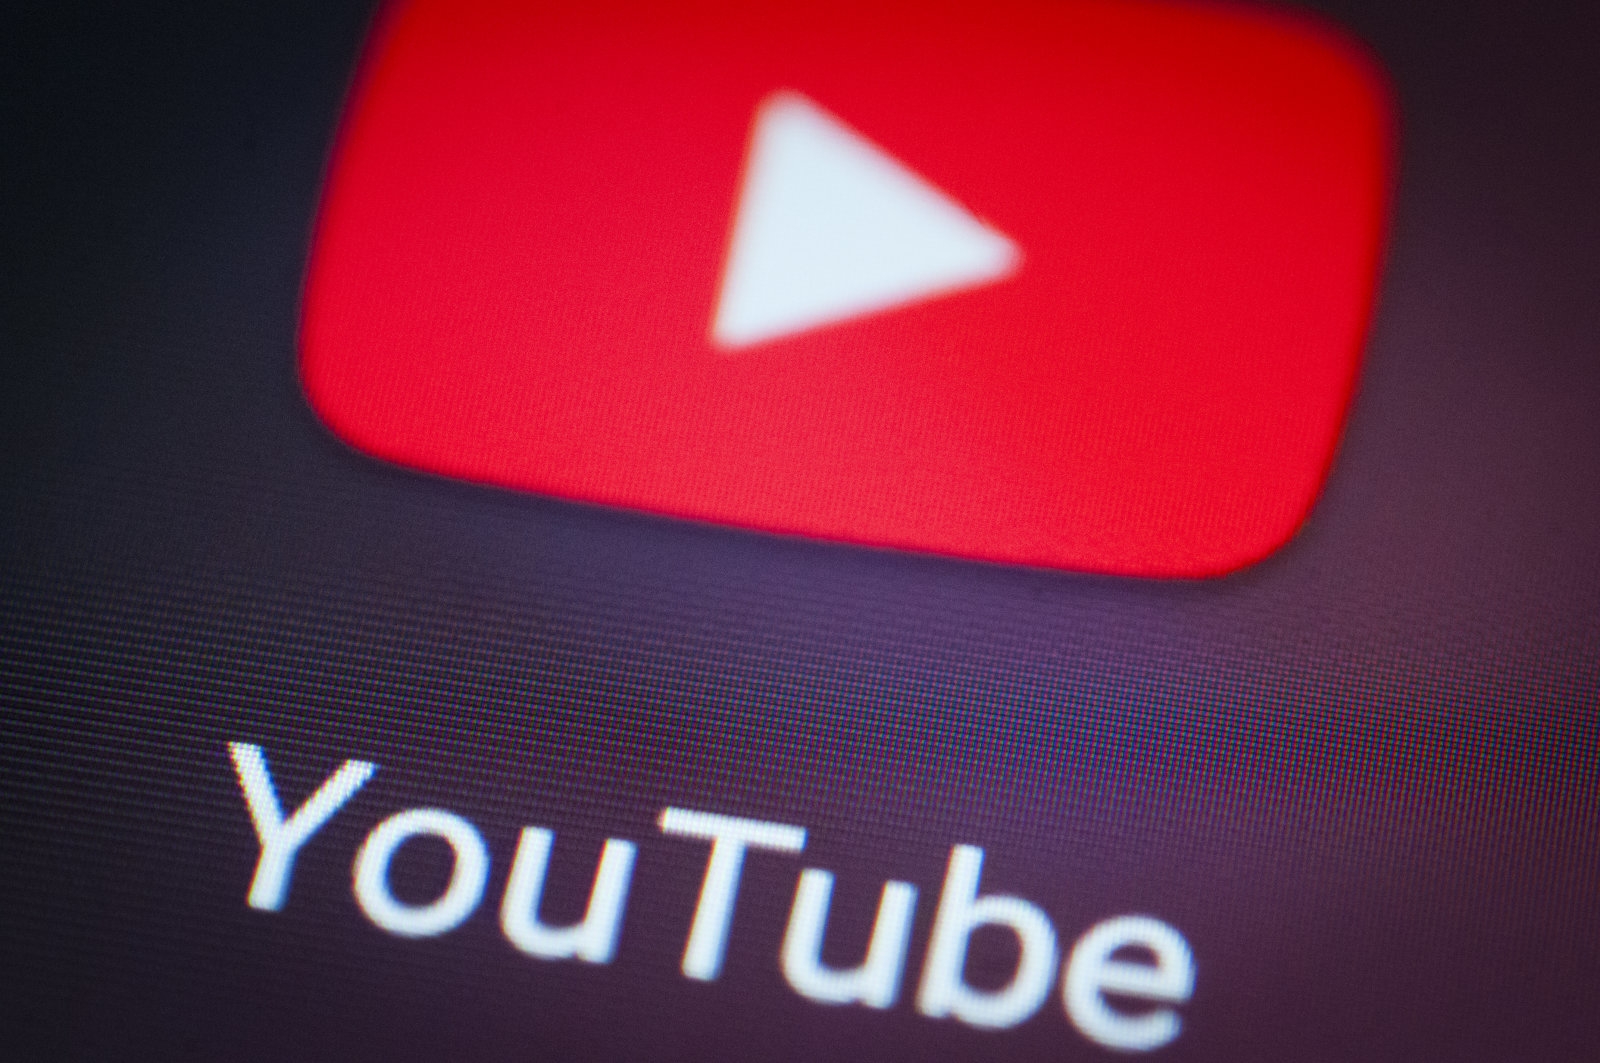 YouTube's trending section shows it has a fake news problem, too | DeviceDaily.com